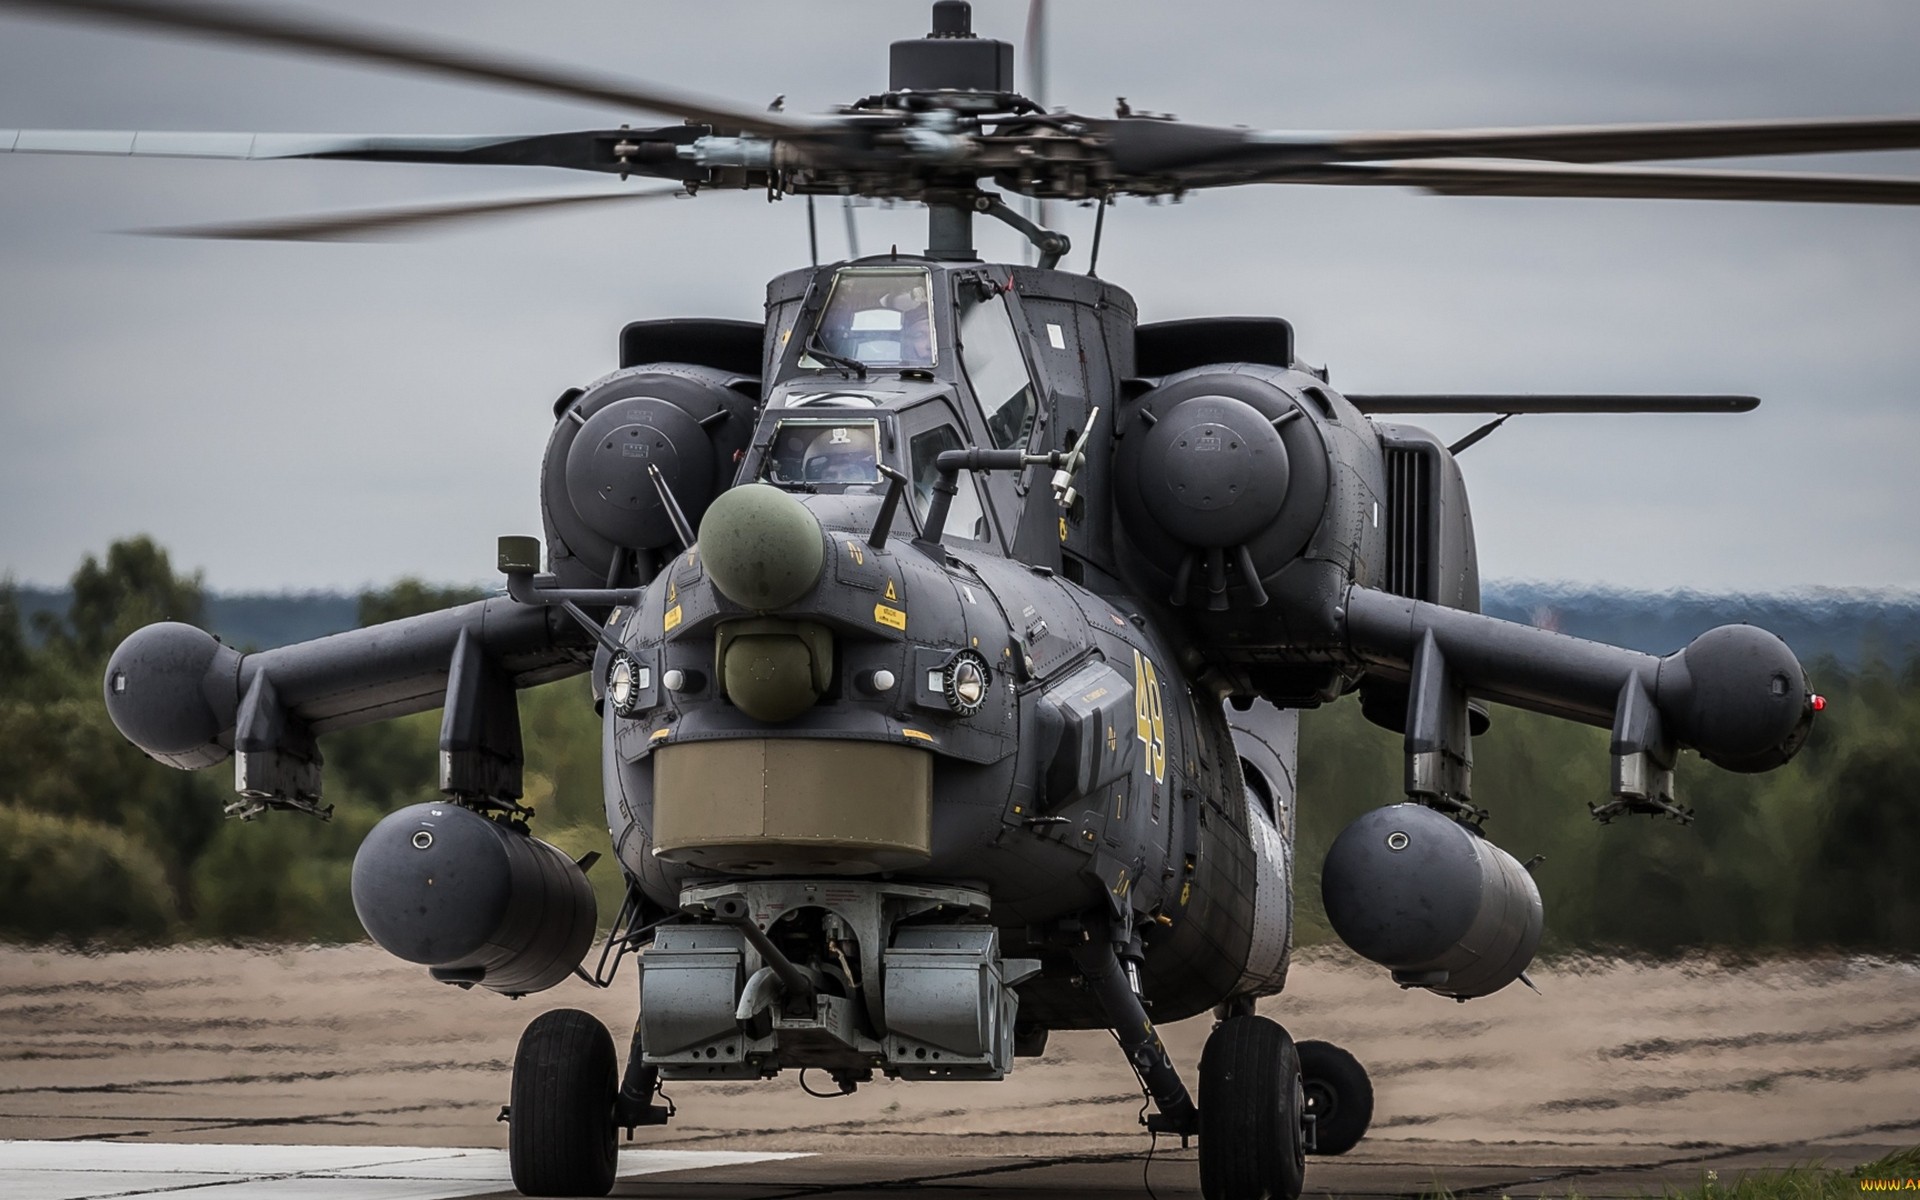 General 1920x1200 Mil Mi-28 helicopters military Russian Air Force attack helicopters vehicle military aircraft military vehicle aircraft Mil Helicopters Russian/Soviet aircraft